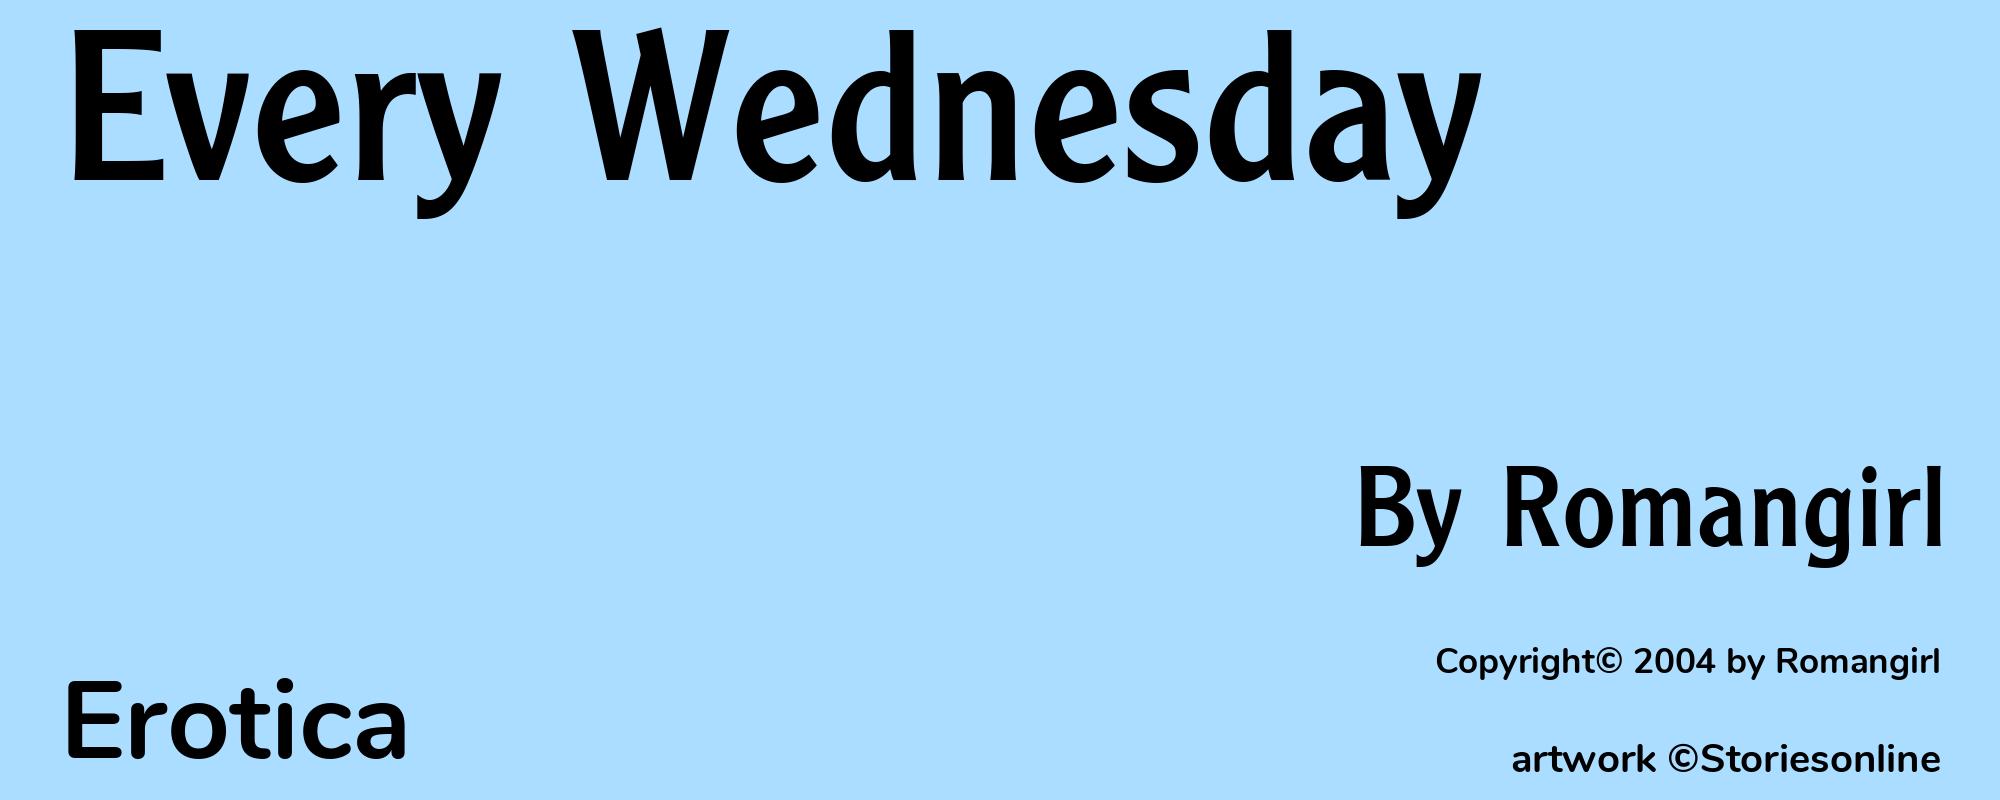 Every Wednesday - Cover